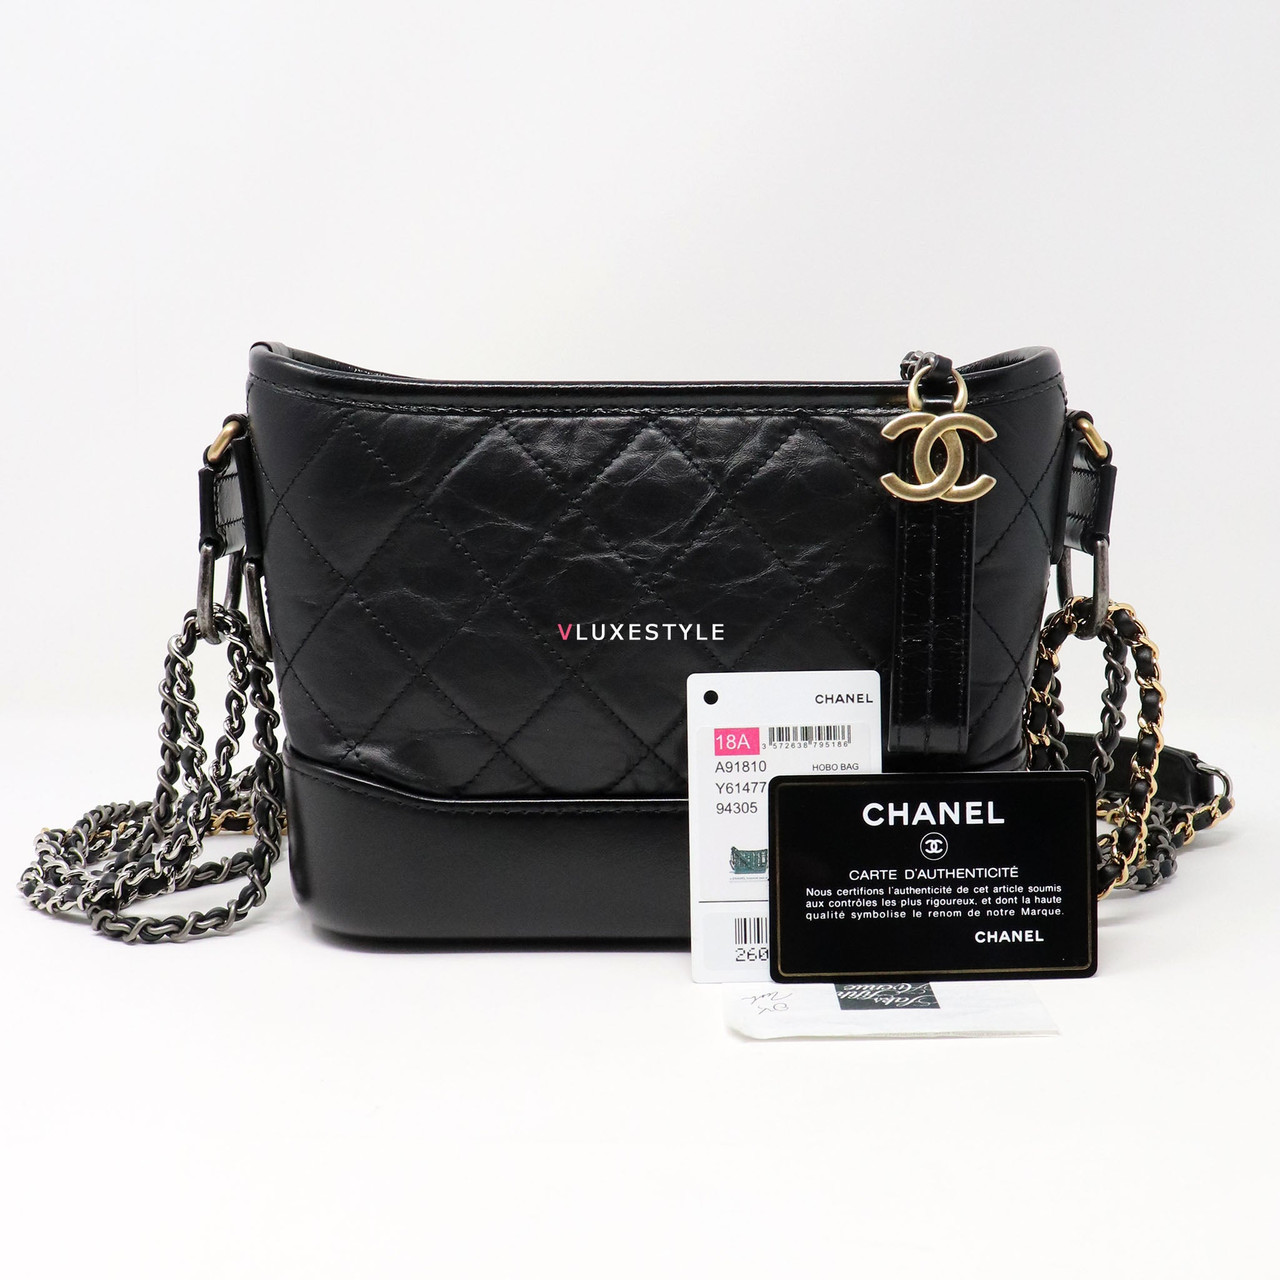 Chanel 18A Small Gabrielle Hobo Black Quilted Aged Calfskin, Smooth Calfskin  with mixed hardware